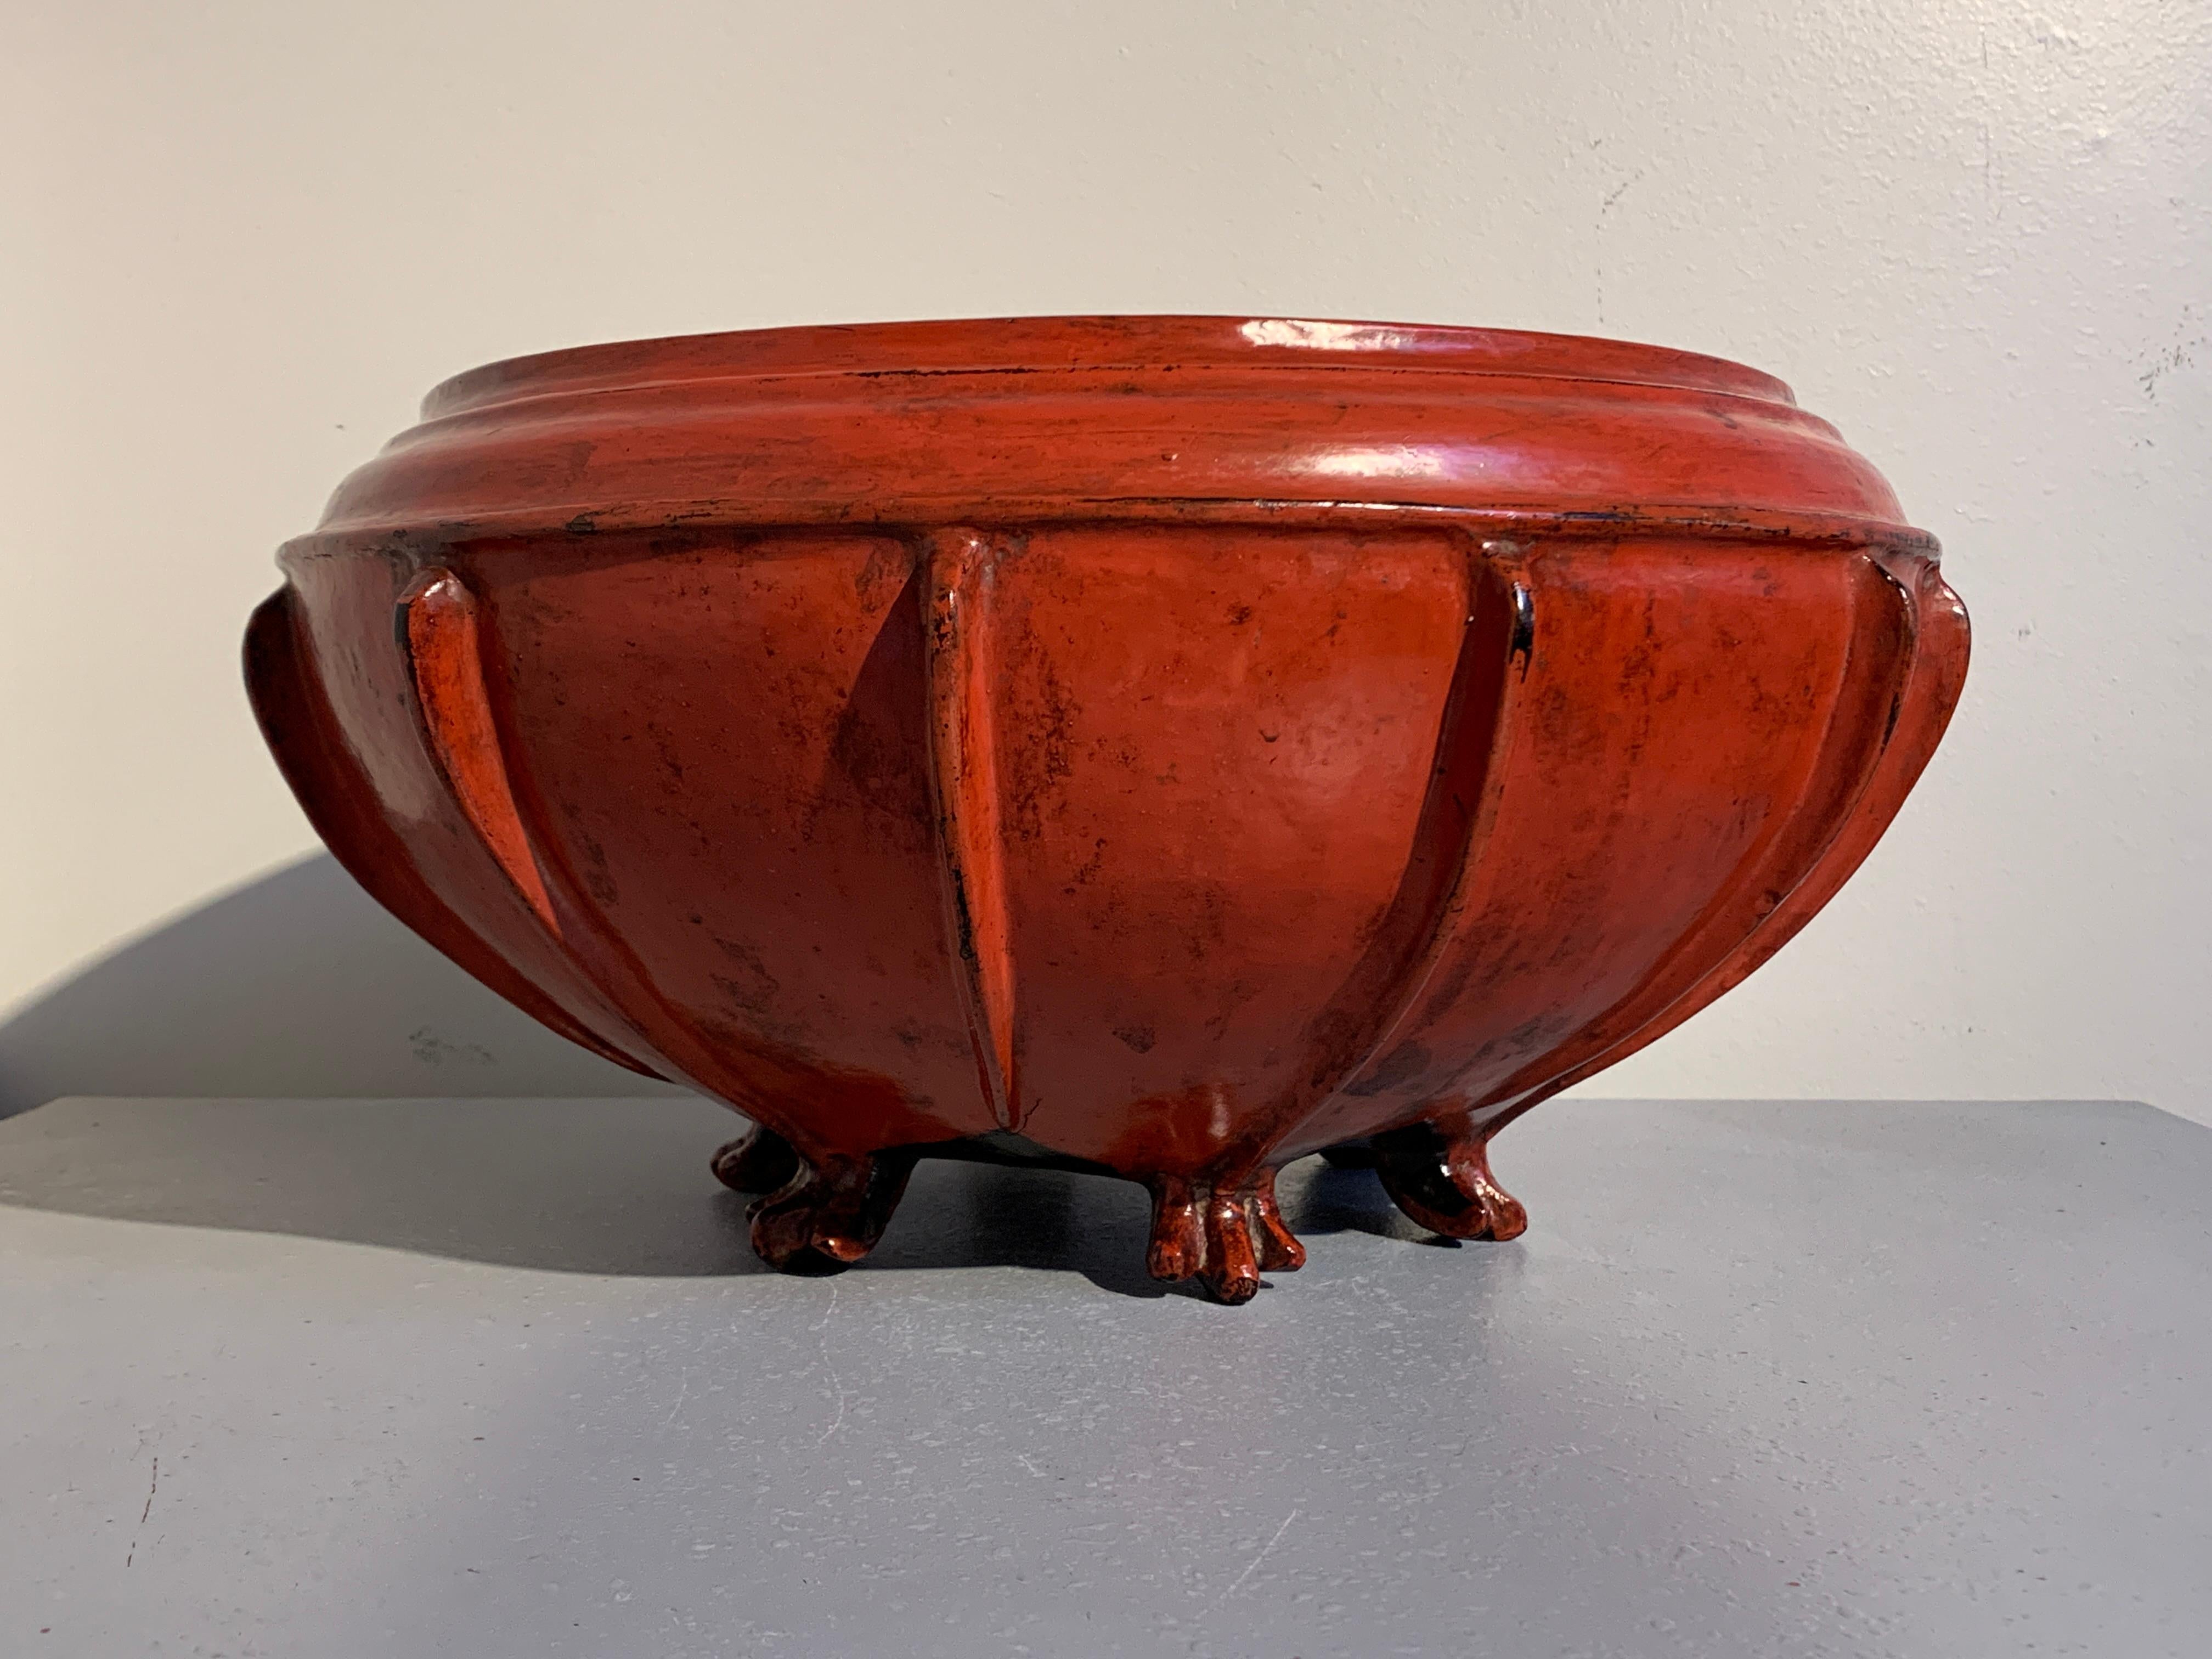 A stunning Burmese woven bamboo and red lacquered large offering bowl, late 19th or early 20th century.

The attractive footed bowl of large melon or squash form, with a slight neck and wide mouth, and an even wider body featuring twelve ribs, all